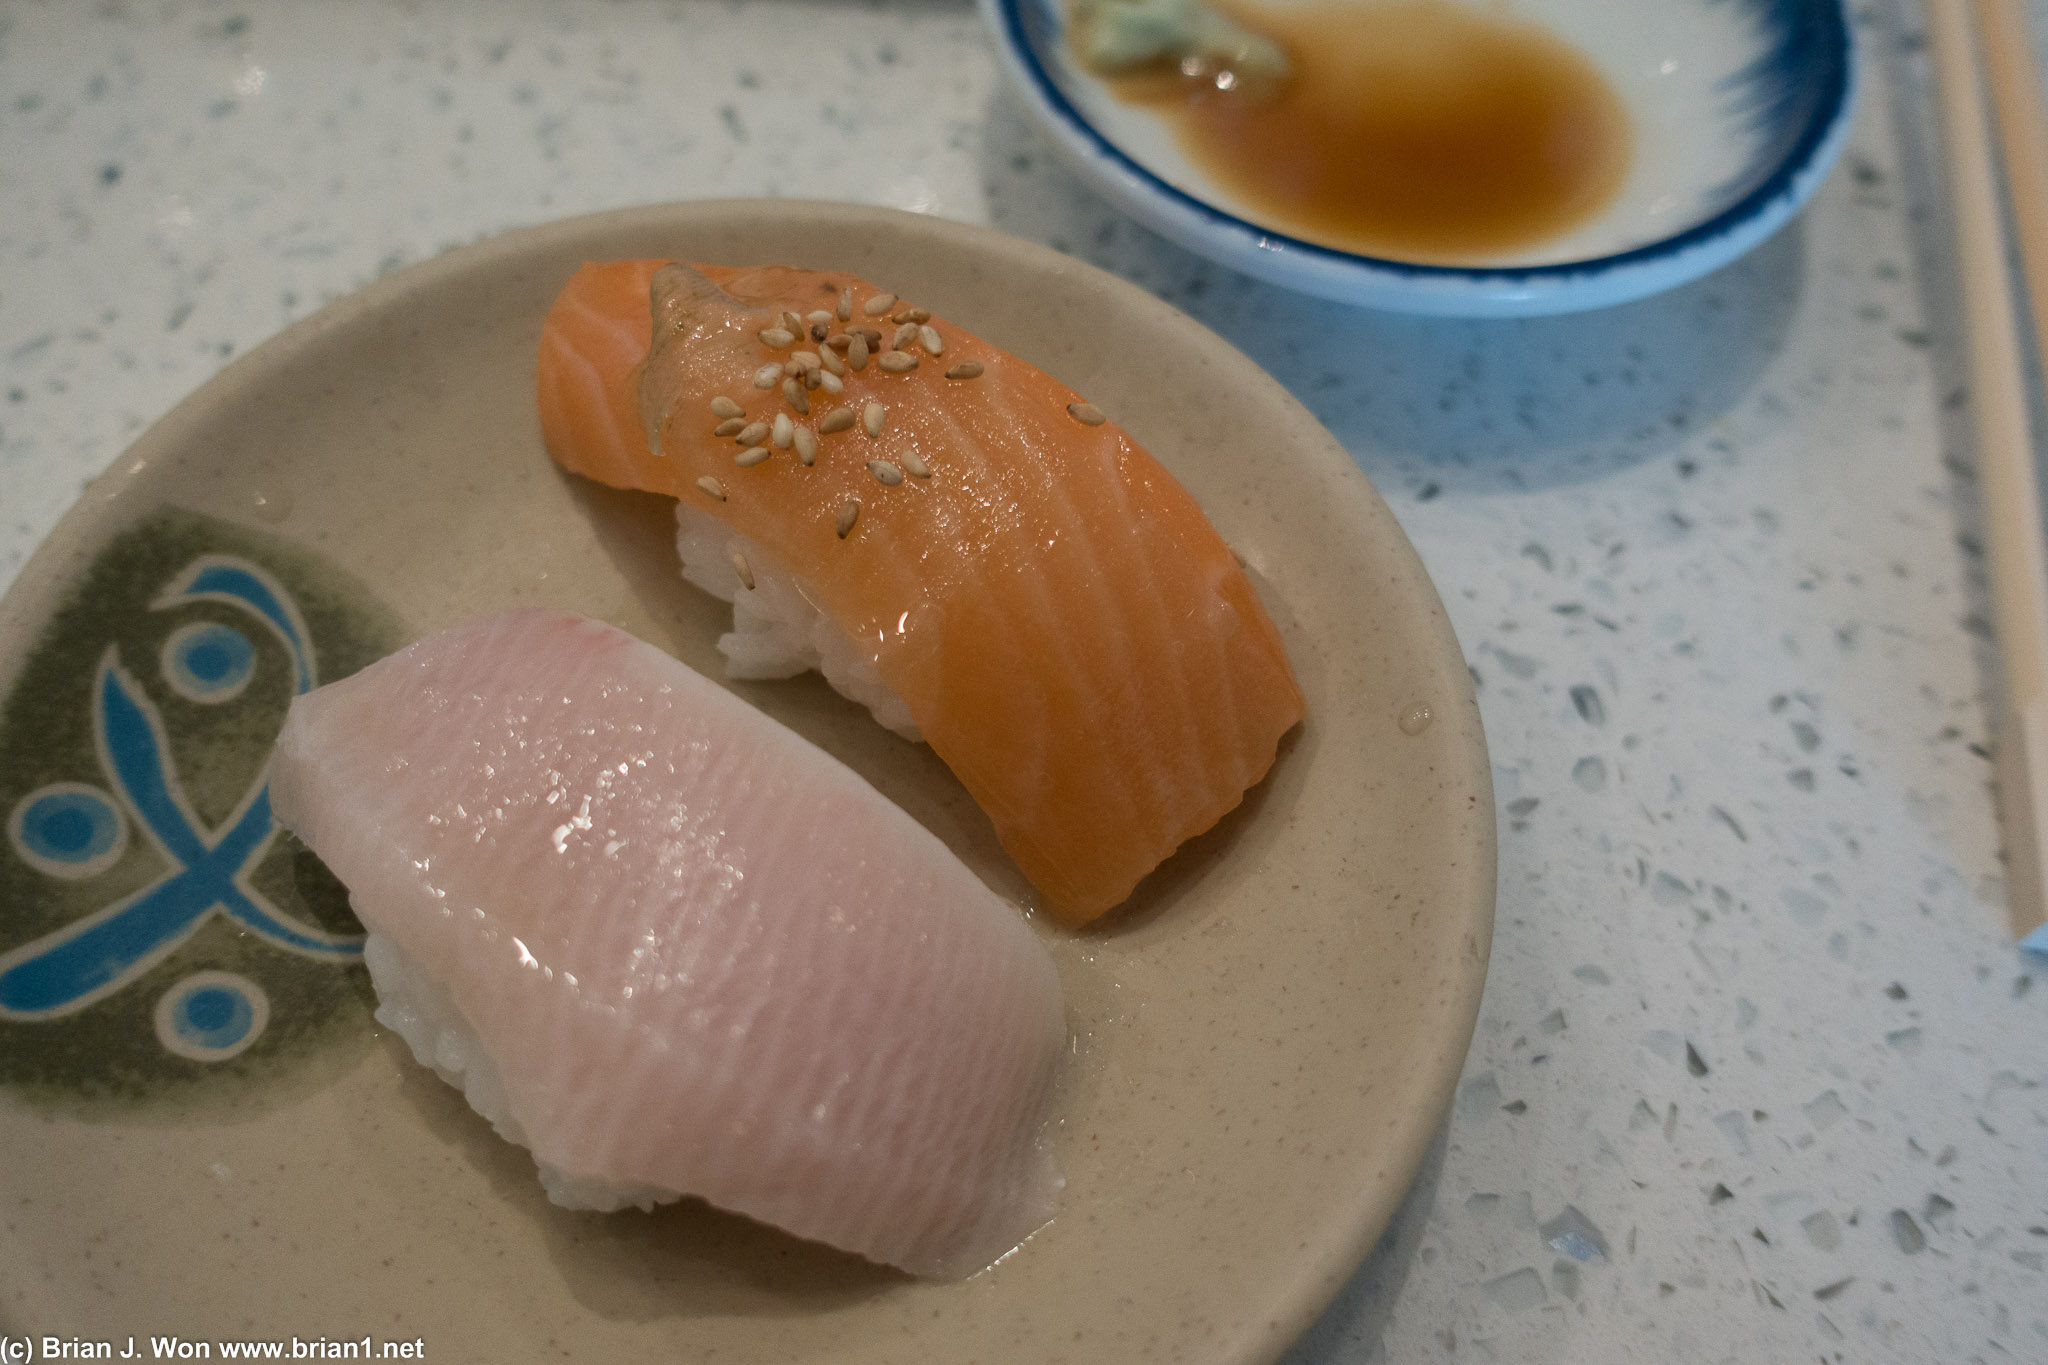 Salmon and albacore (I think?) was quite good.